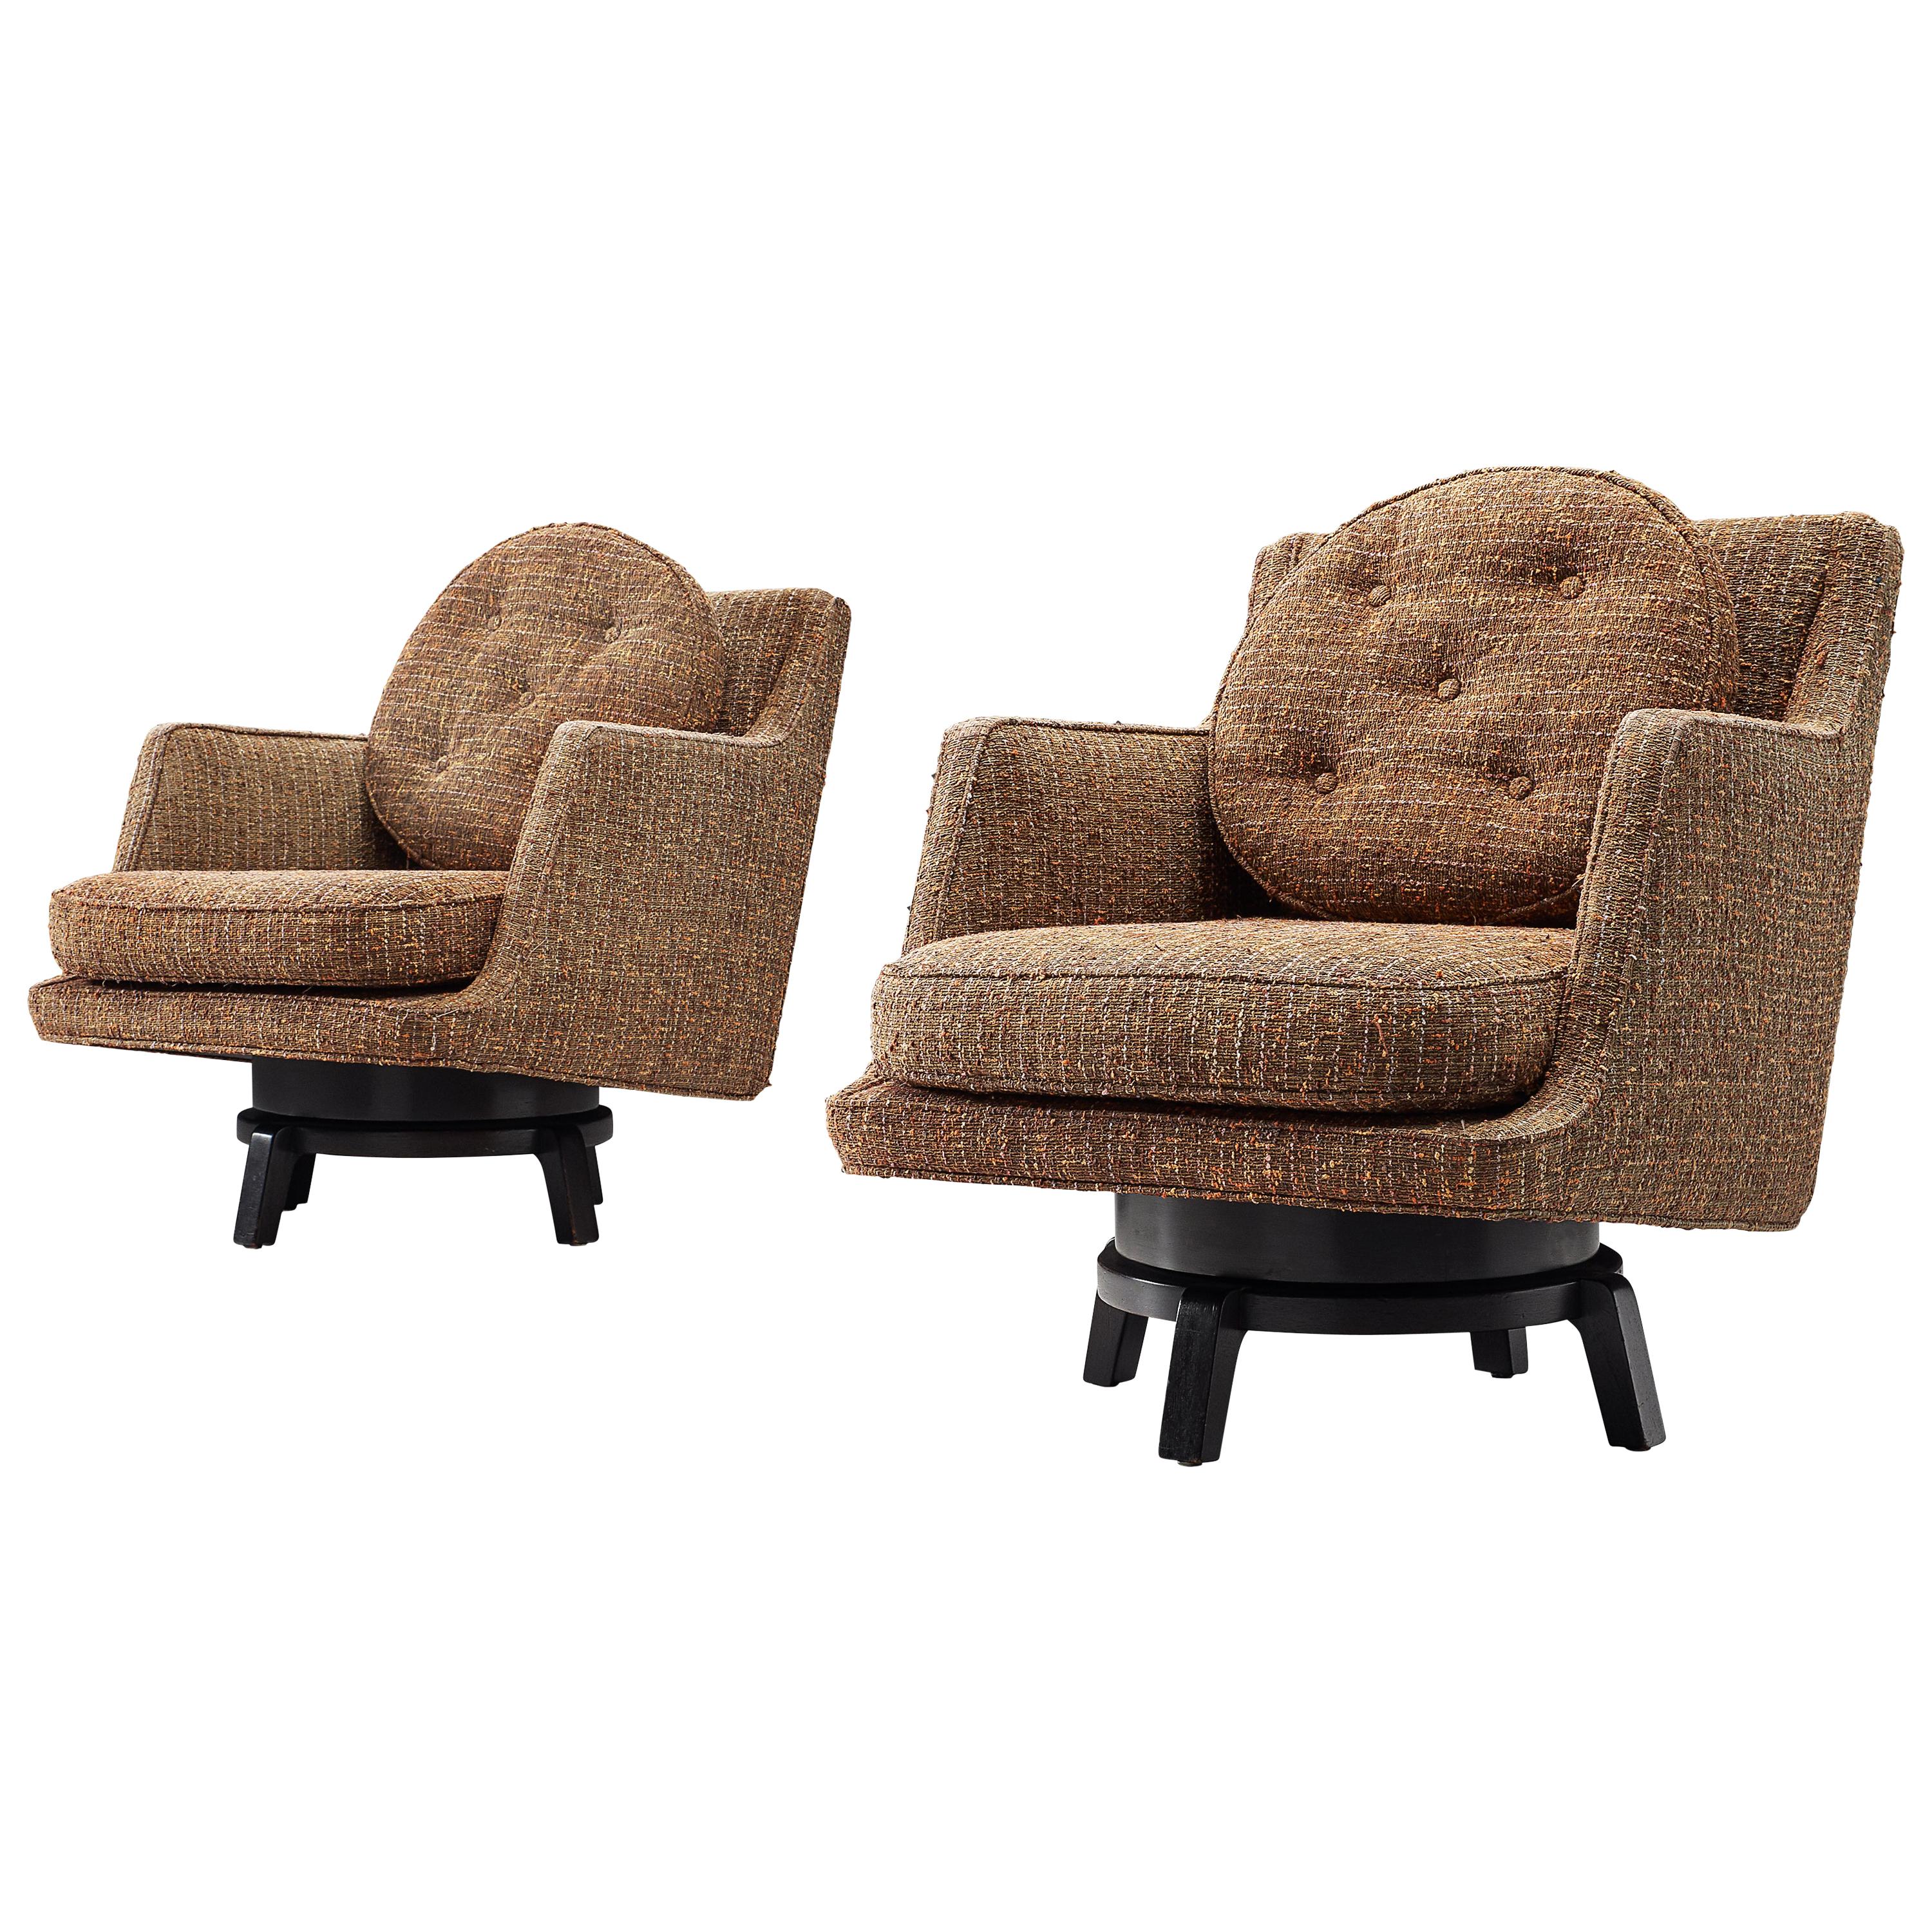 Edward Wormley Swivel Chairs Model '5609' in Mahogany and Fabric Upholstery